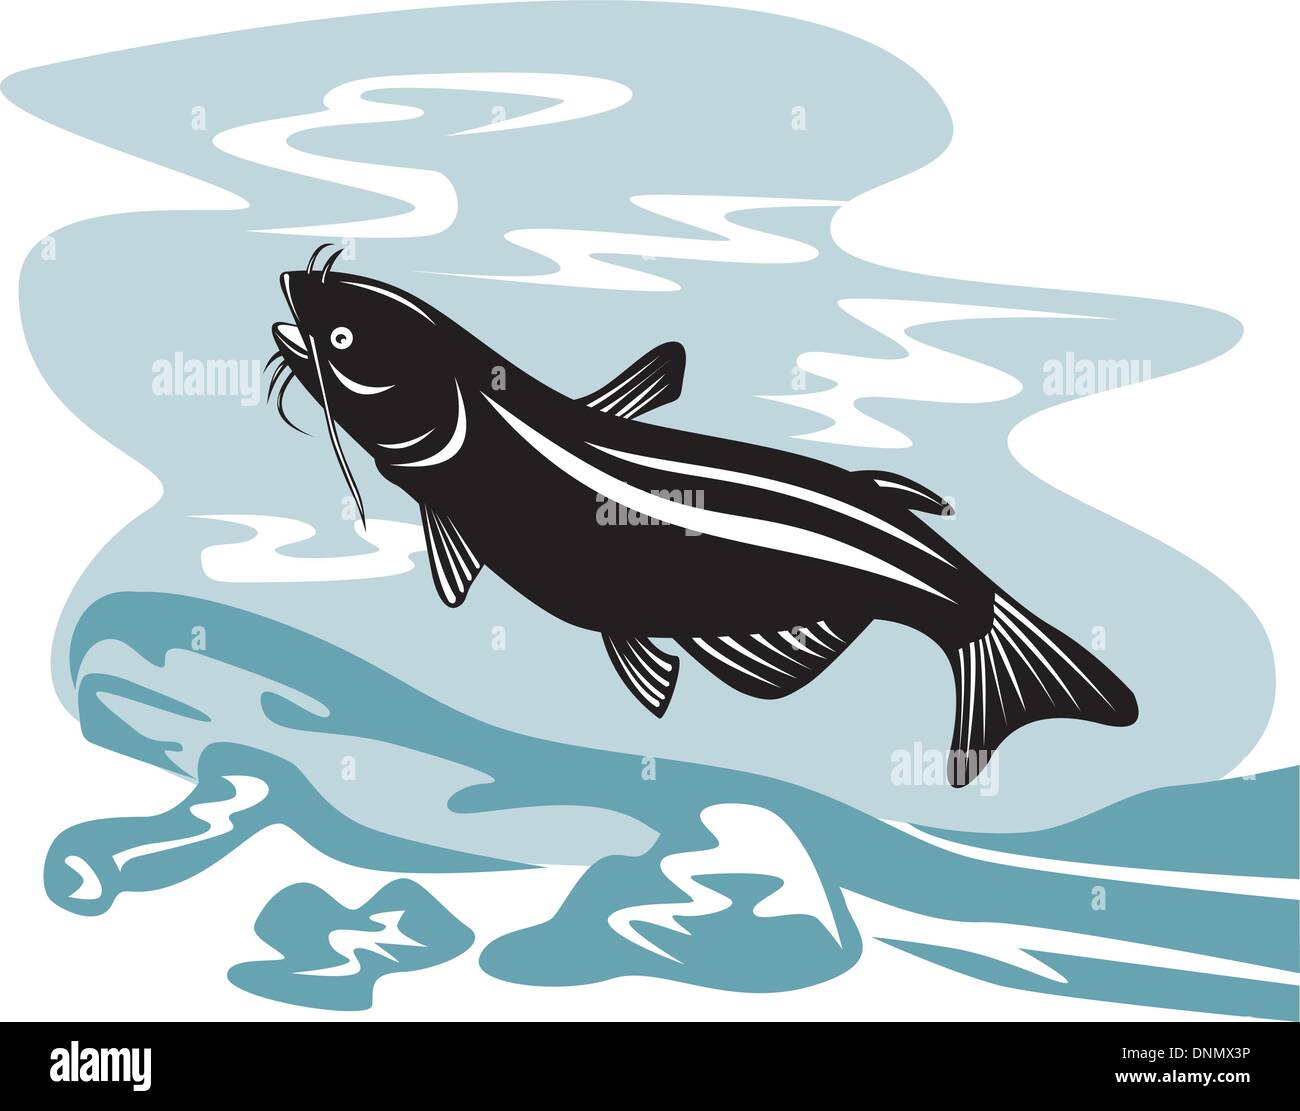 Illustration of a catfish jumping done in retro style. Stock Vector